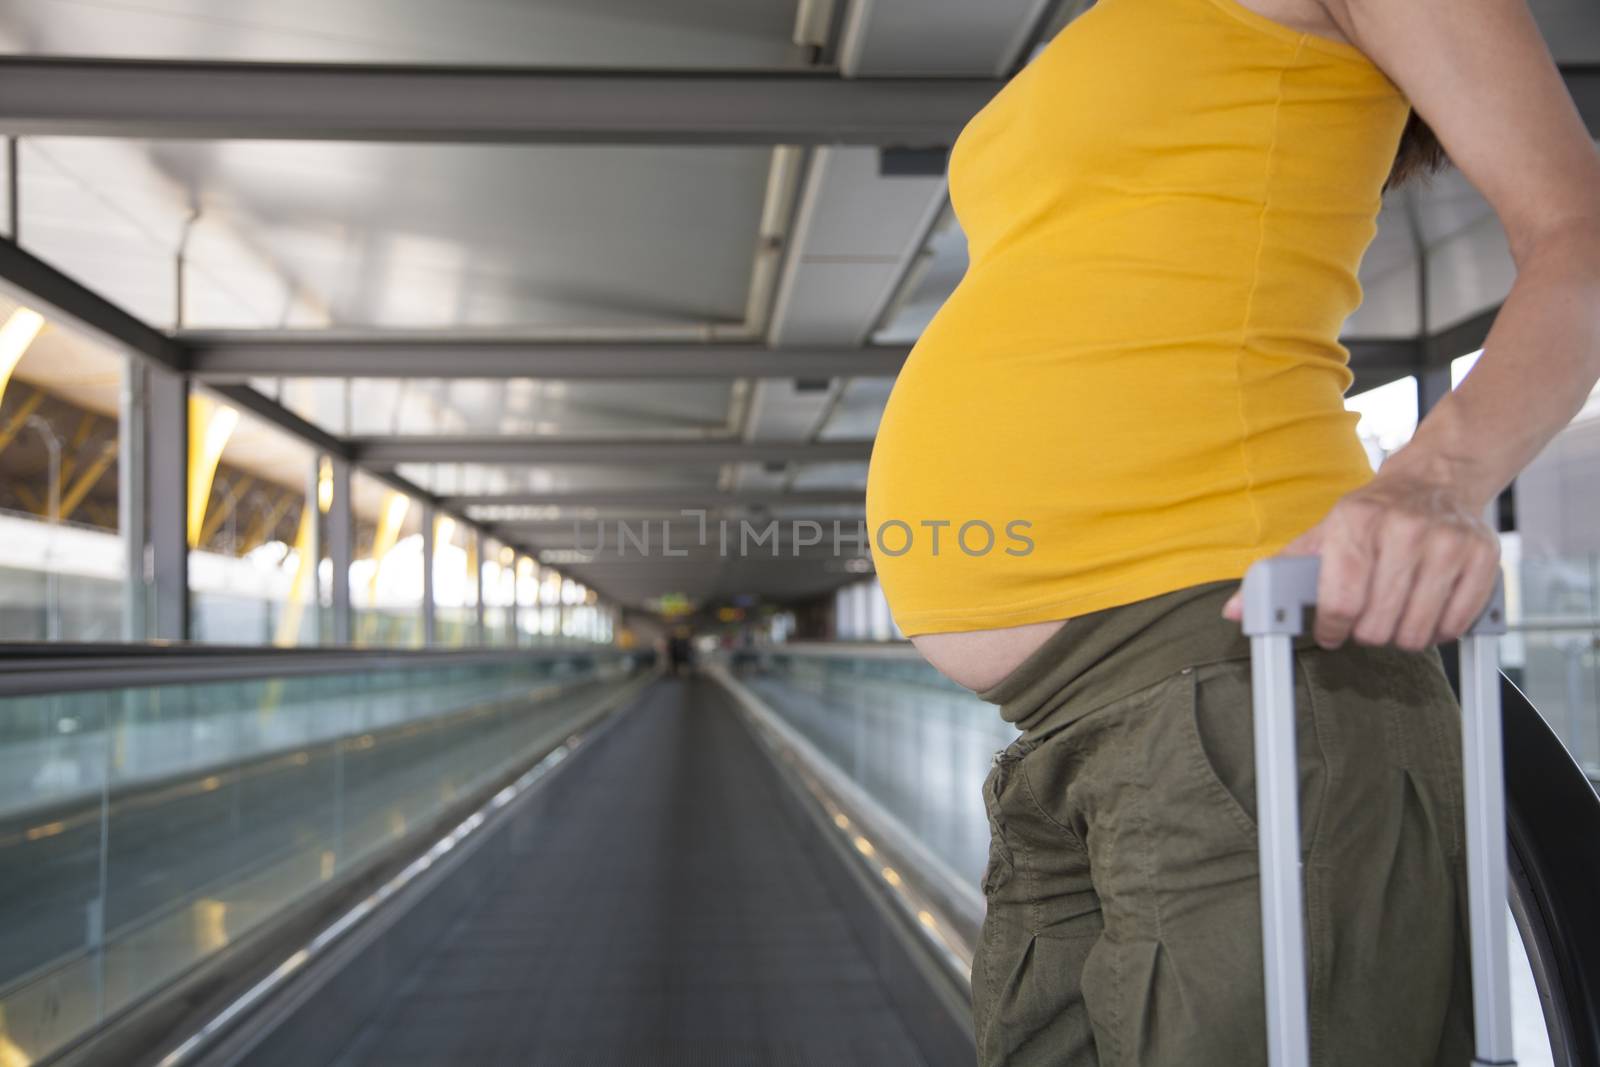 tummy of woman pregnant pulling suitcase in airport hall